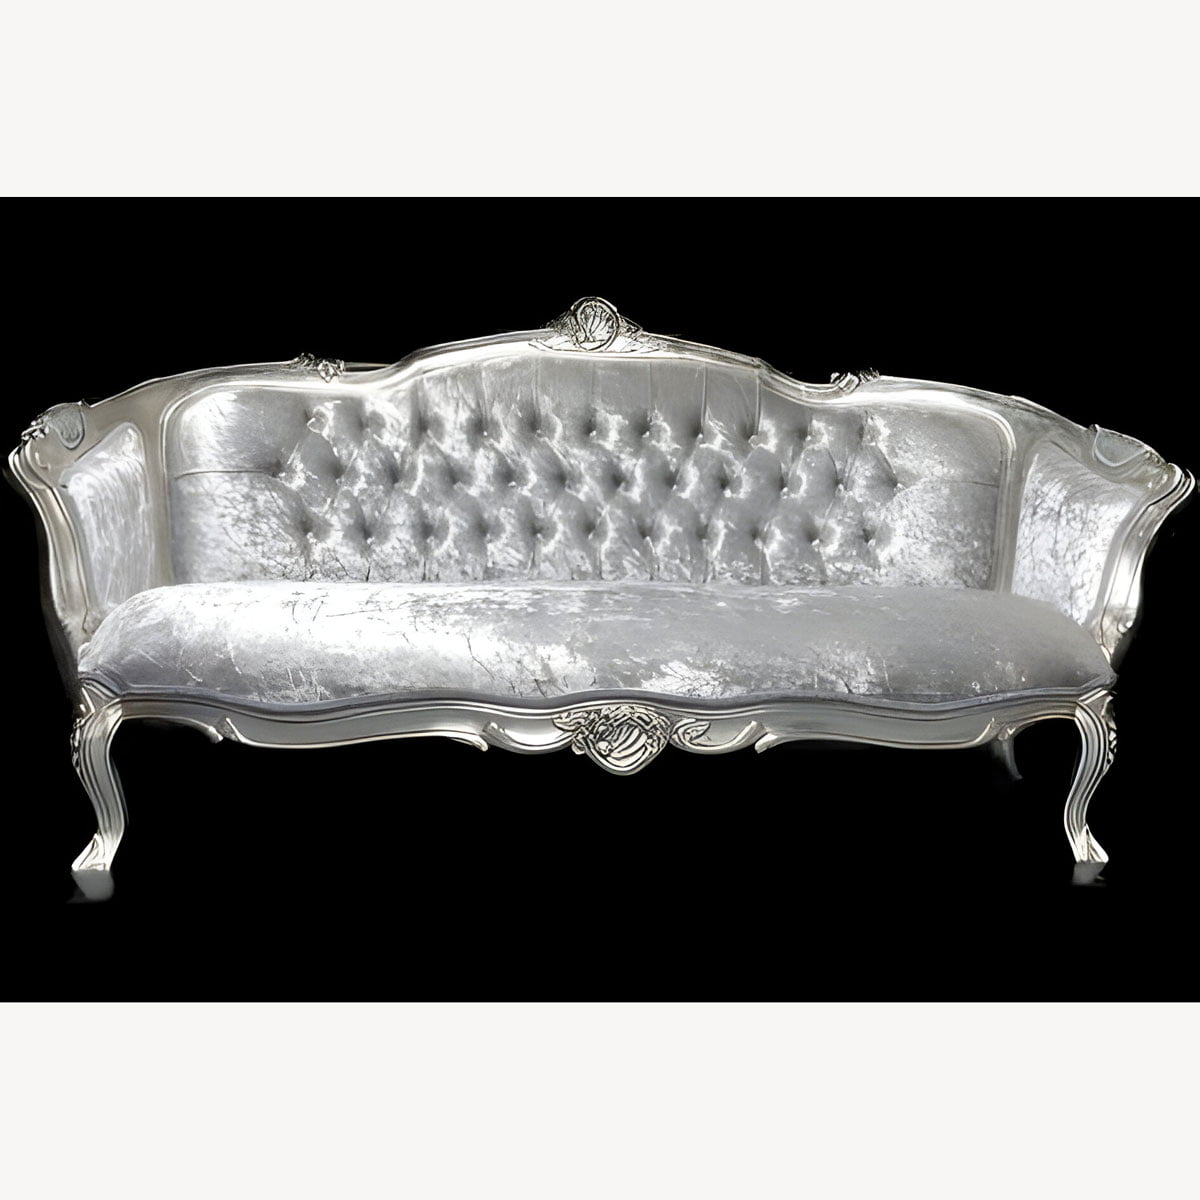 Ascot Salon Sofa Double Ended Chaise Silver Leaf Grey Silver Crushed Velvet With Crystals - Hampshire Barn Interiors - Home - Hampshire Barn Interiors News